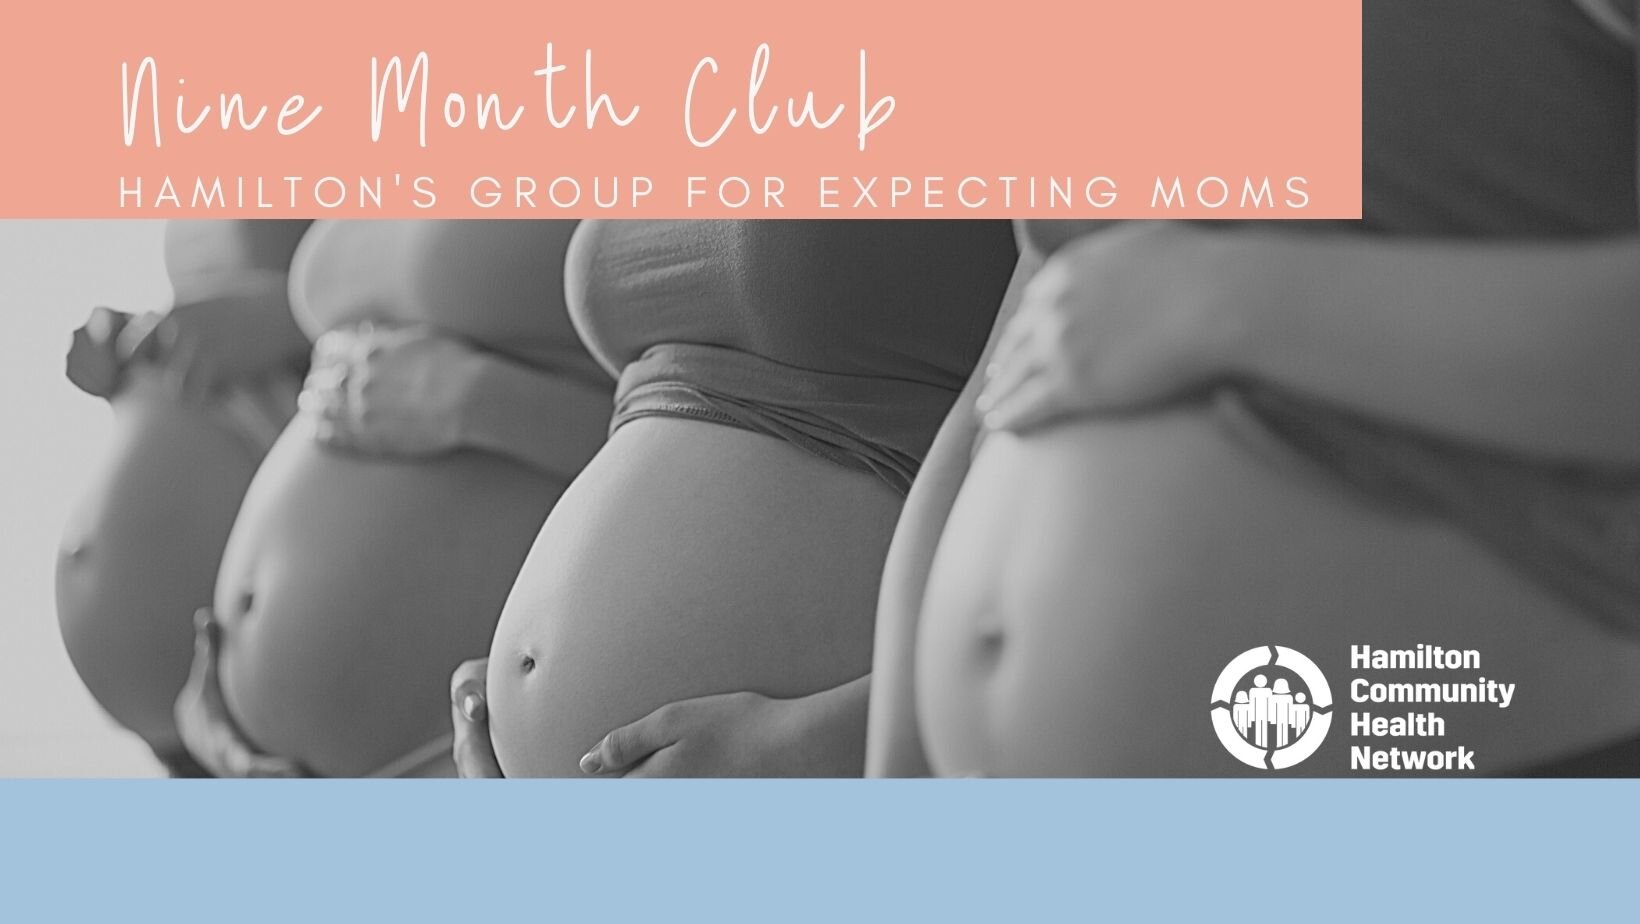 The 'Nine Month Club' holds virtual discussions on how to manage pregnancy every fourth Wednesday of the month from 2 to 3 p.m.